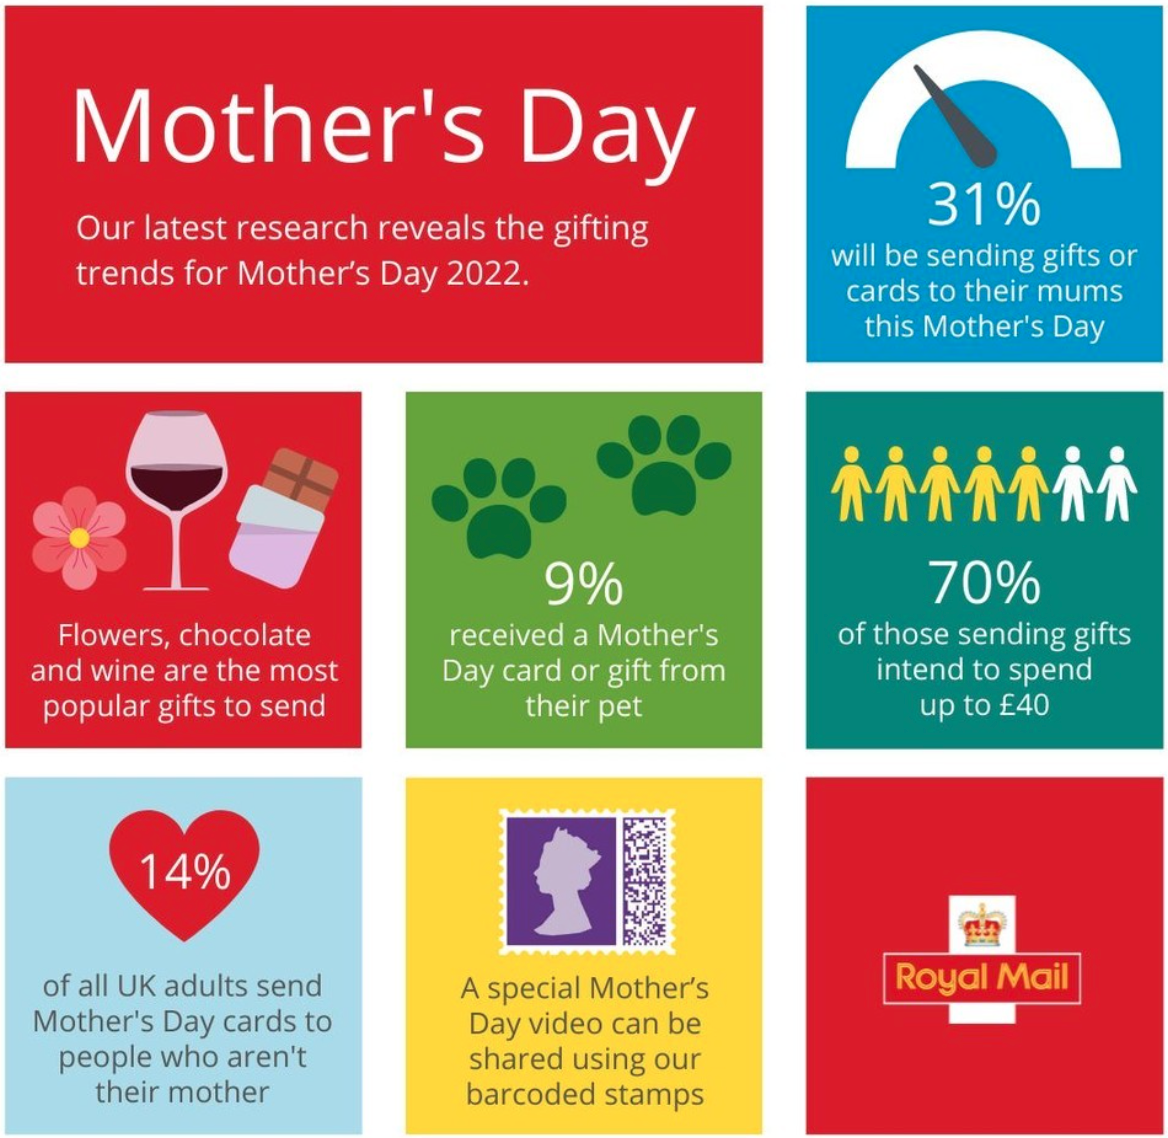 Above: Royal Mail’s research showed 14% of adults send a Mother’s Day card to those who aren’t their mums